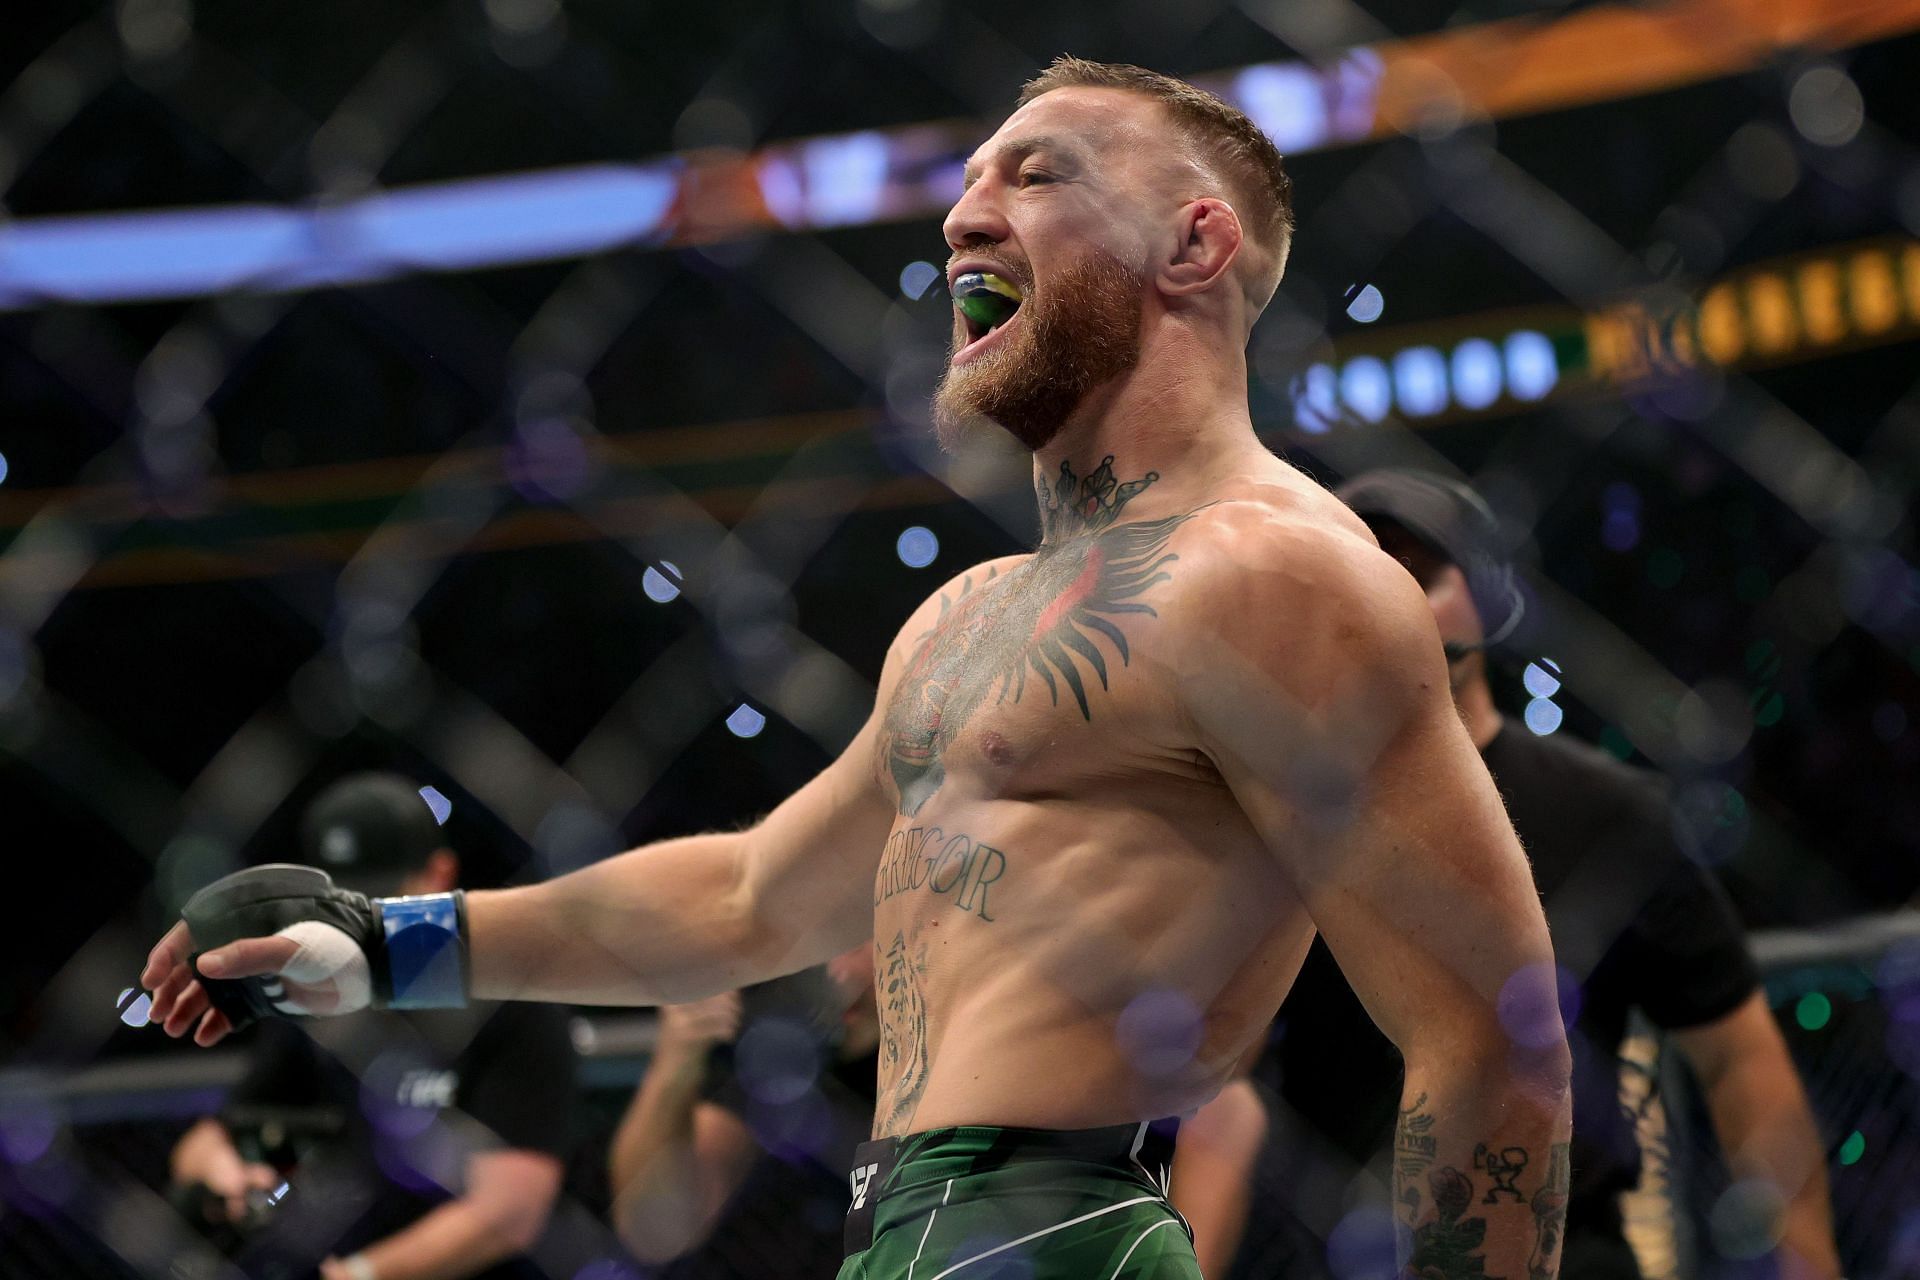 Conor McGregor is well known for his trash talking.